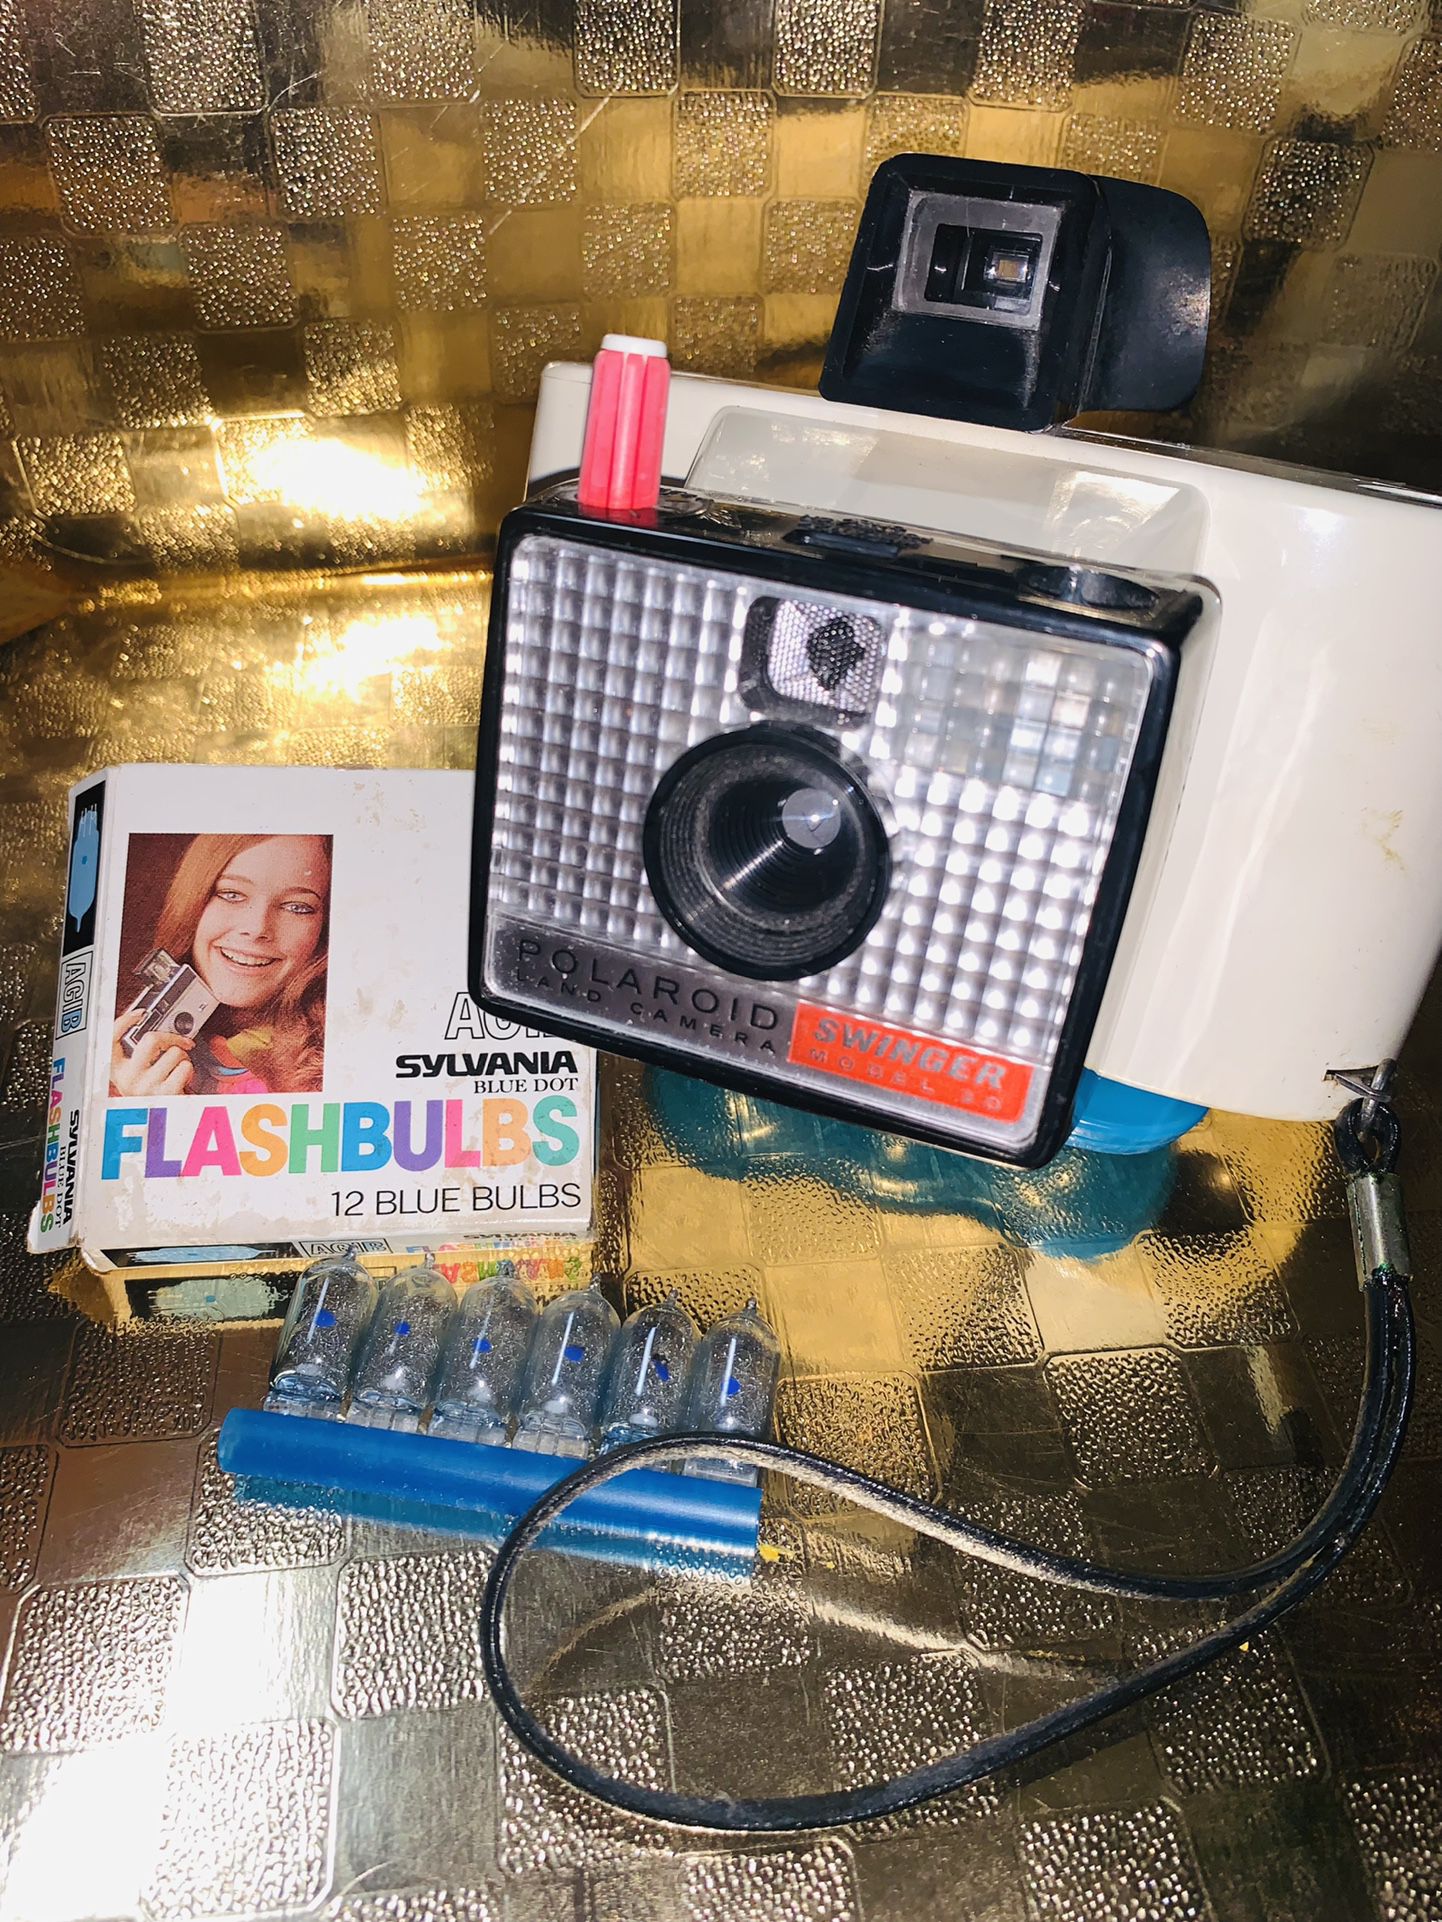 POLAROID 1965 VINTAGE COLLECTORS “SWINGER INSTANT CAMERA “ MODEL 20 Weighs 21 OUNCES w/ SYLVANIA  BLUE DOT FLASHBULBS - SUPER CLEAN